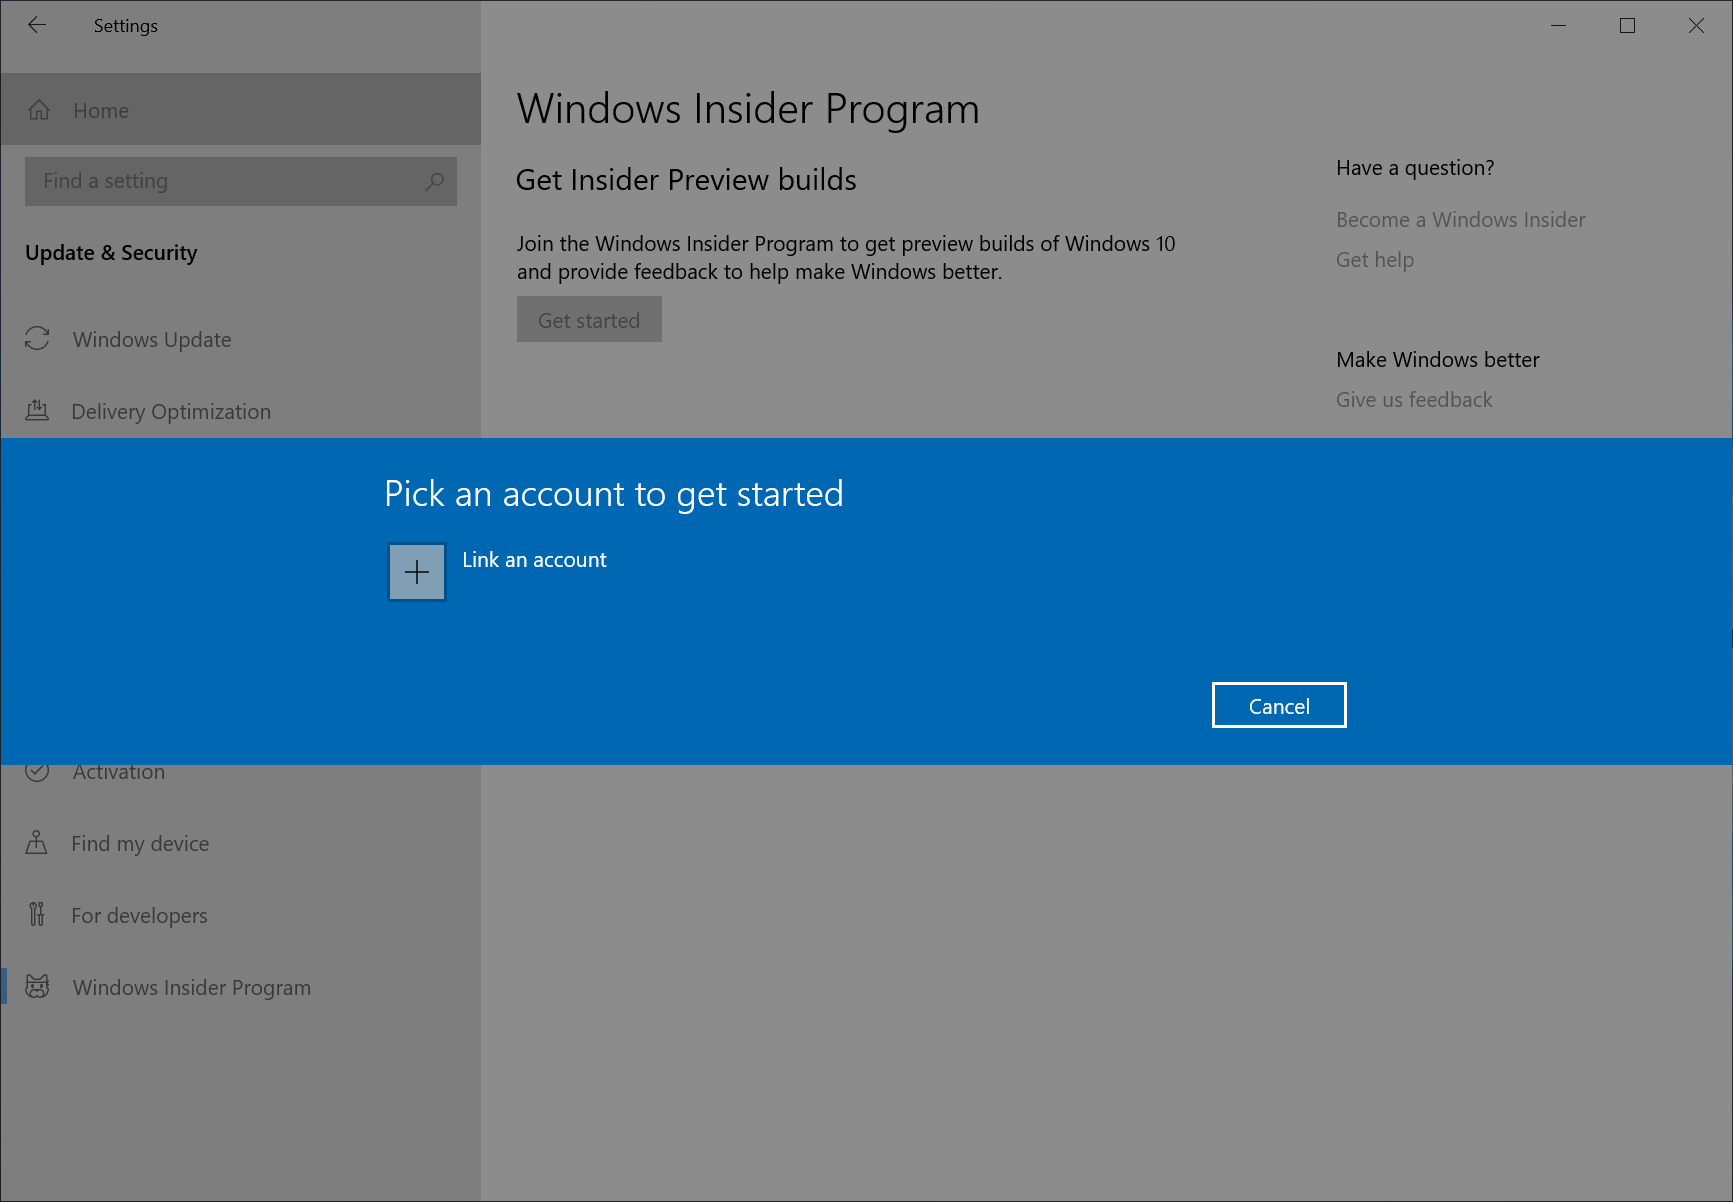 Frequent crashes and Restarts after Windows 10 update in October or November 2019 6a7b5c495efbc557f1359d39f71f0904.png